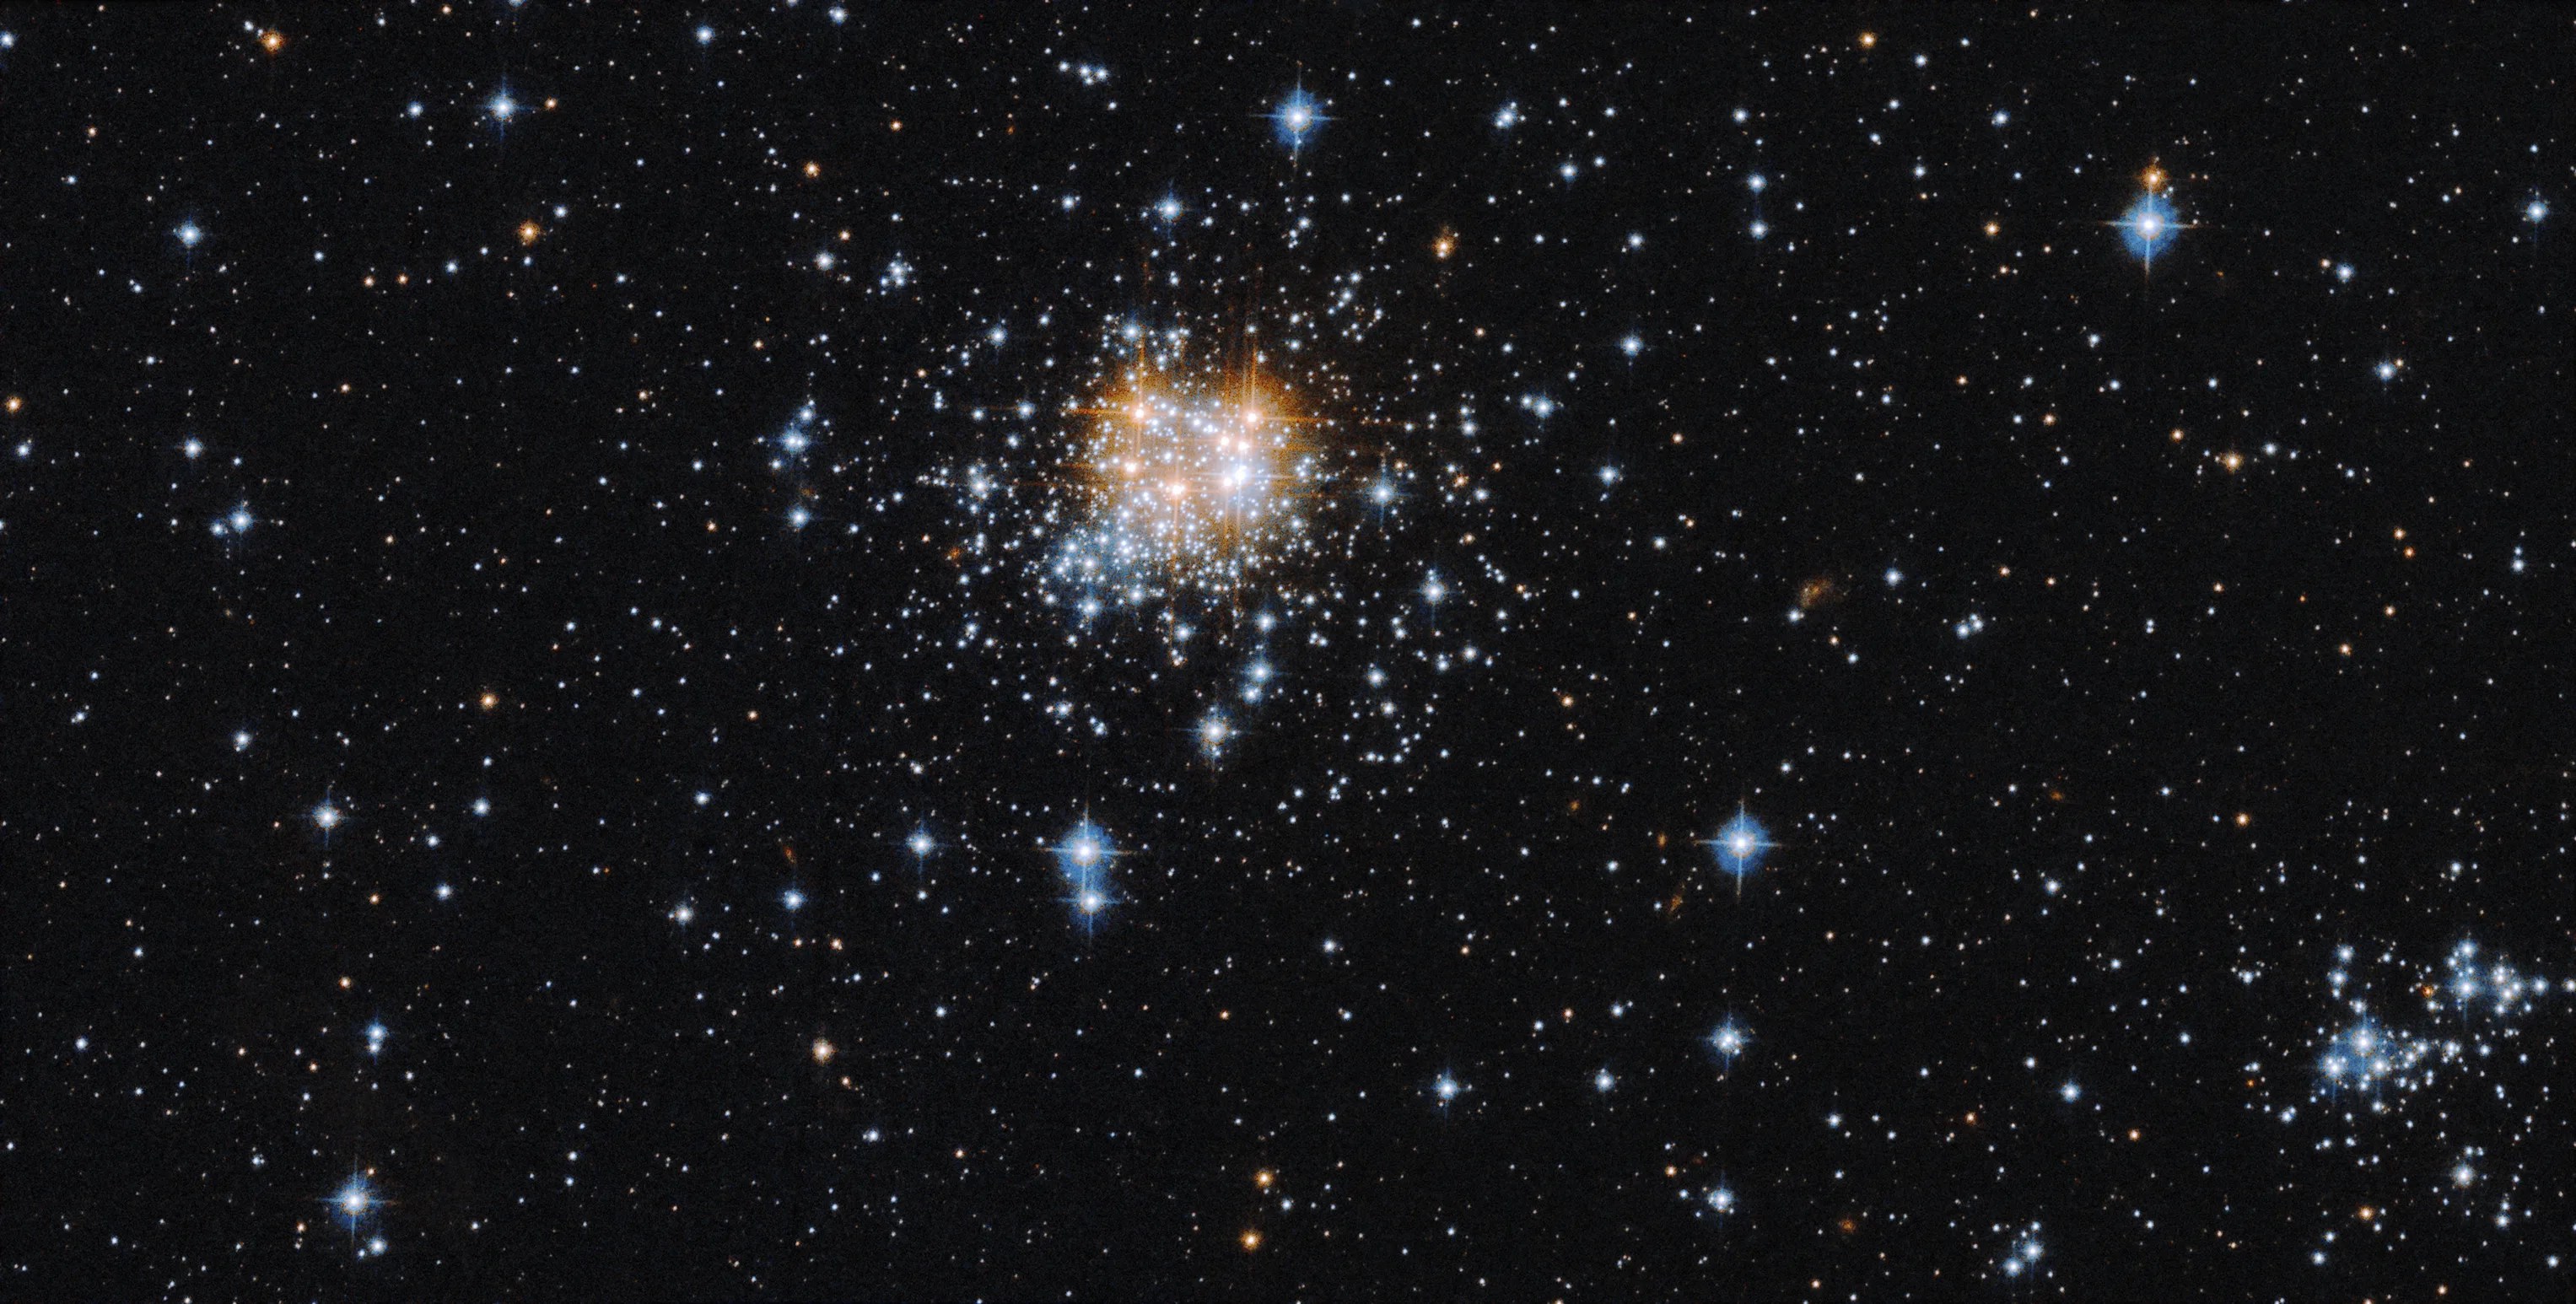 A tight group of bright, blue-white stars just left of center in the image. the group also holds a few orang-white stars. a smattering of blue-white stars against a black background fills the rest of the scene.